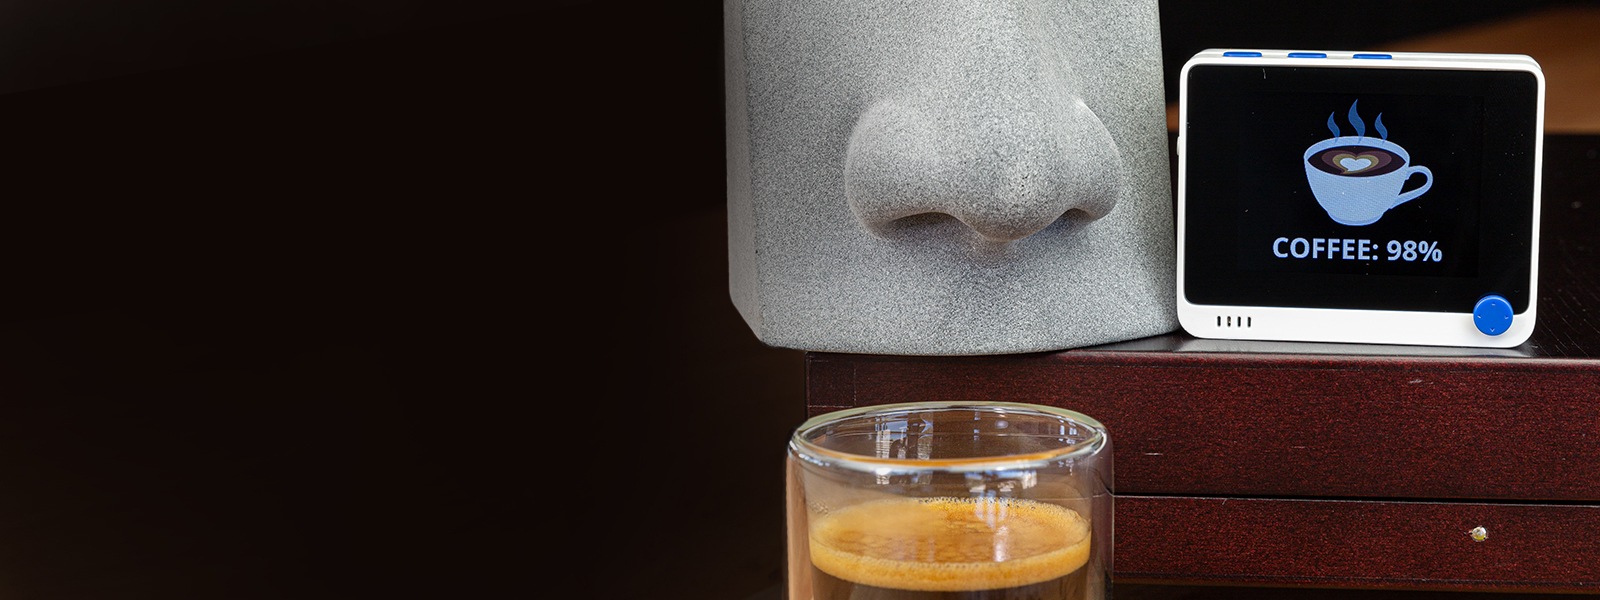 A representation of a human nose smelling a cup of coffee with a device showing the item is 98% coffee.